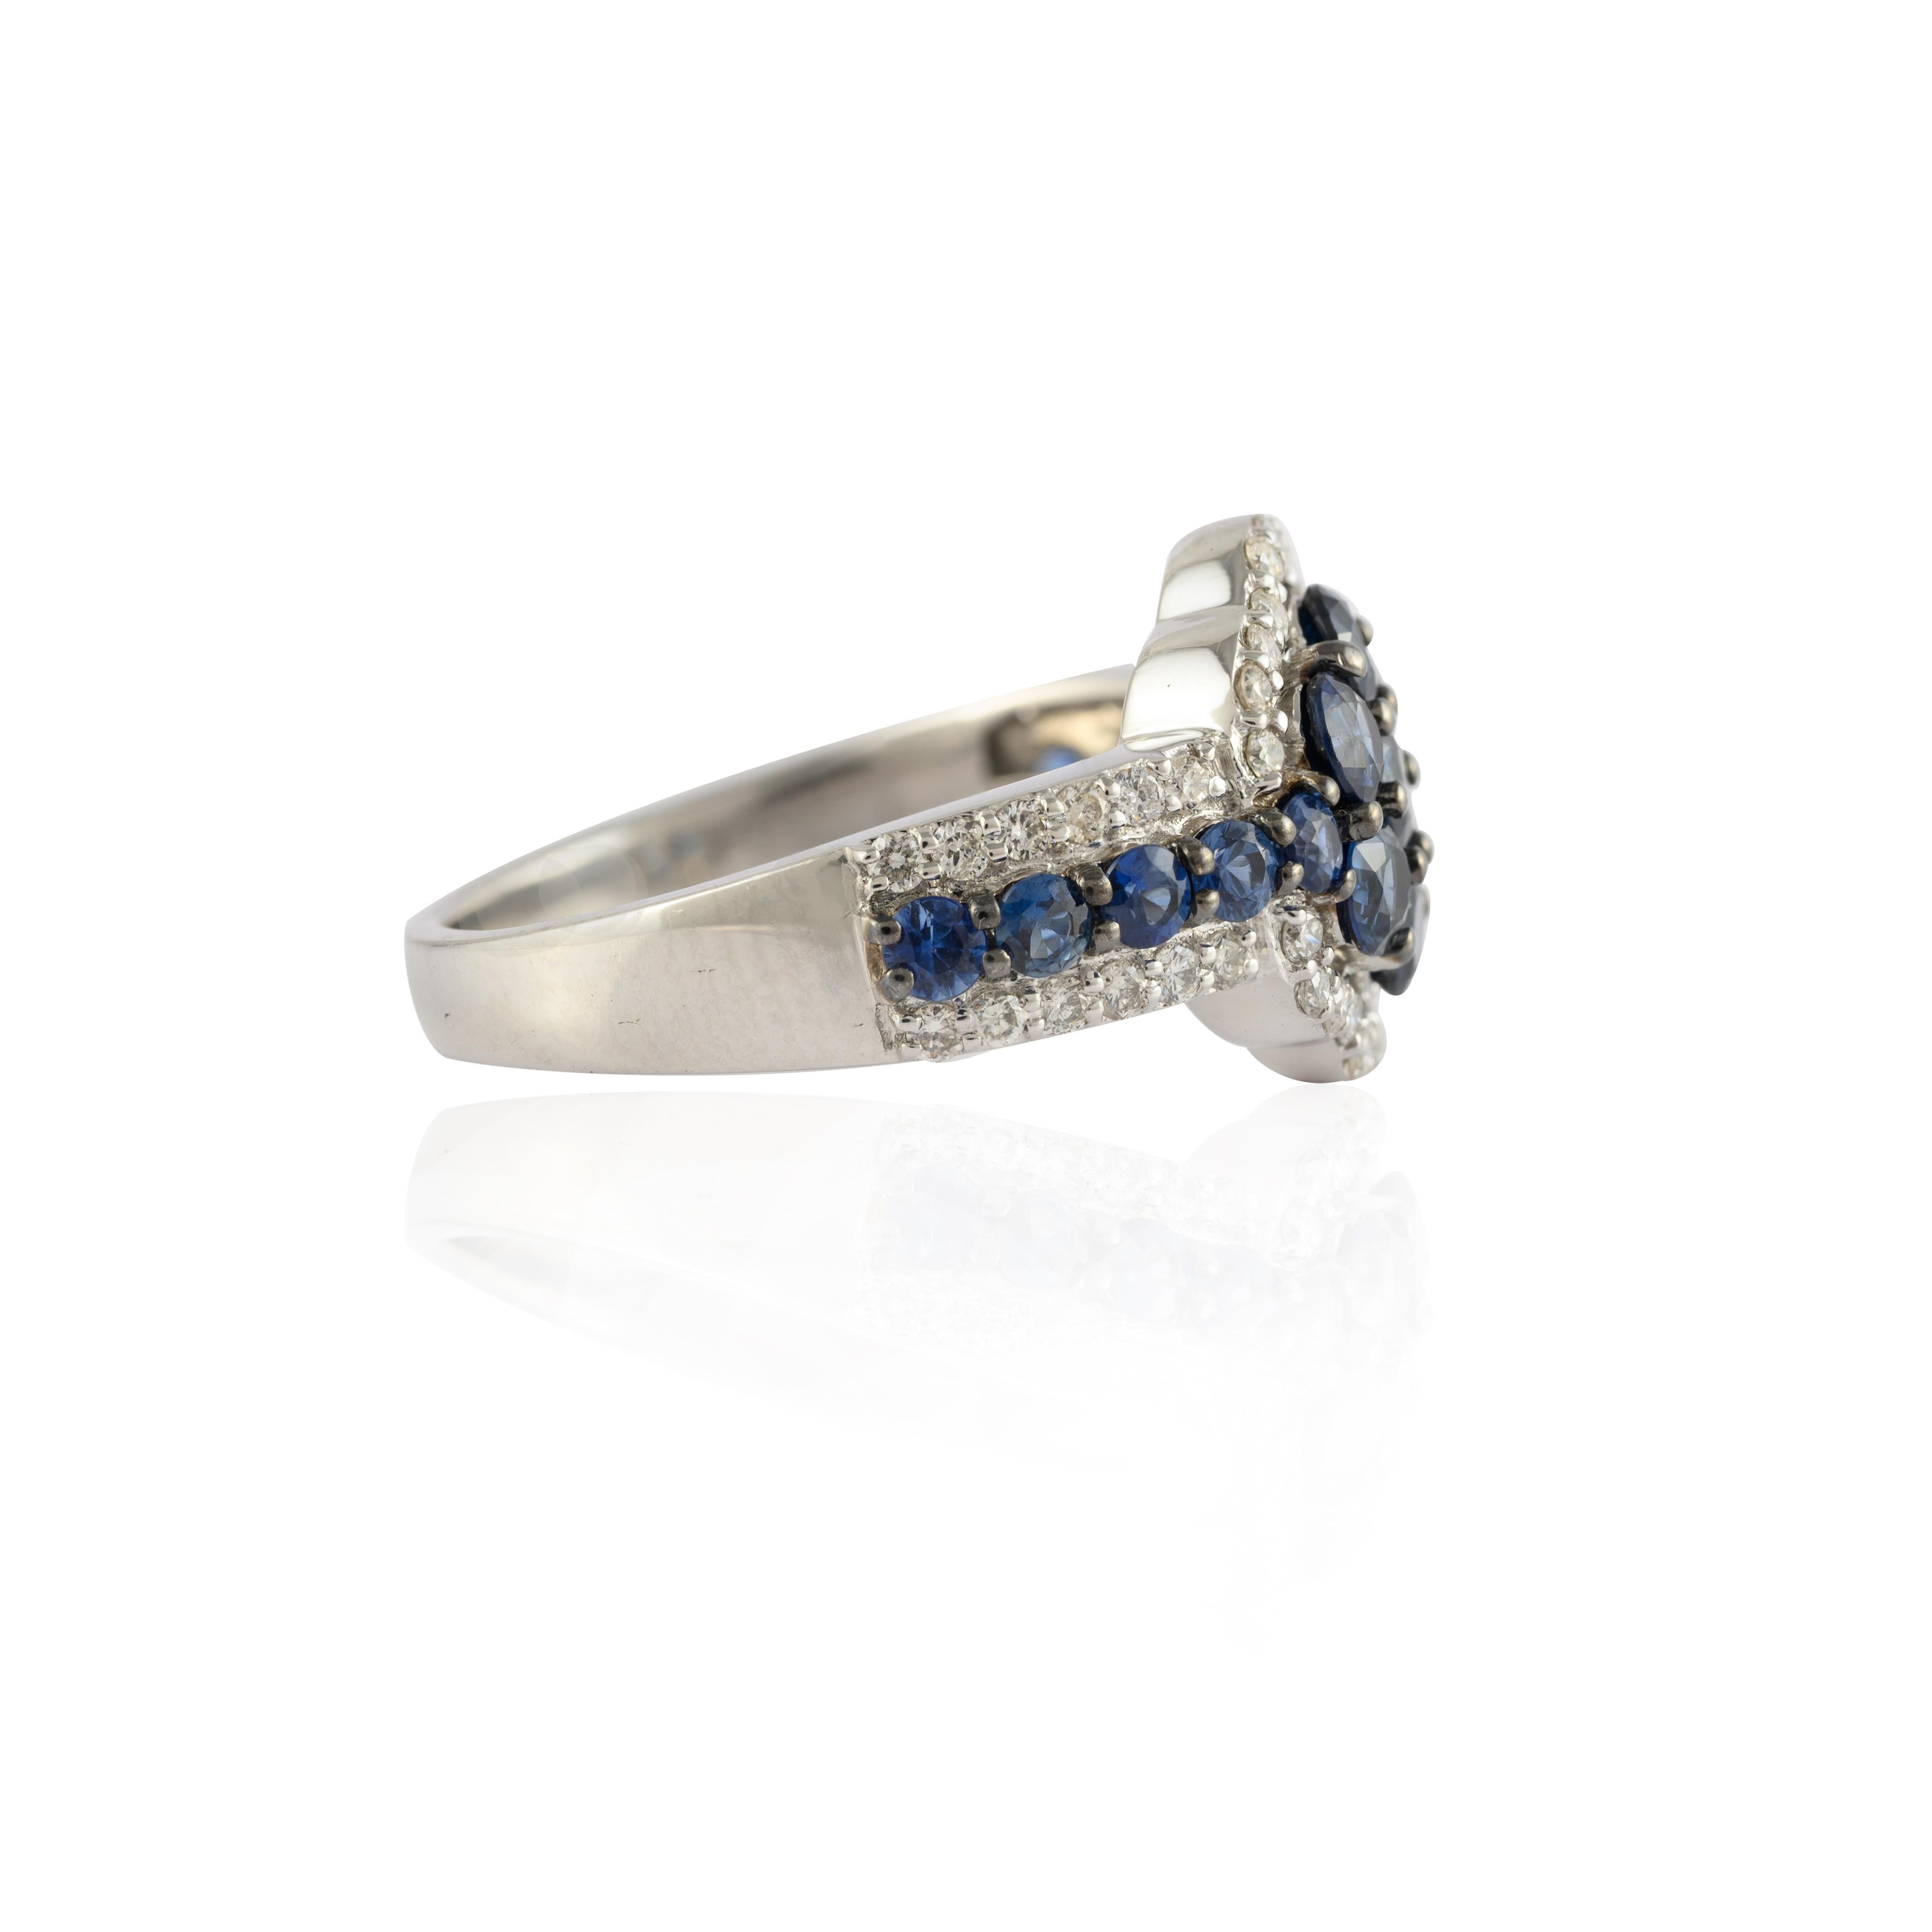 For Sale:  Unique Blue Sapphire Floral Ring with Diamonds in 14k Solid White Gold 3